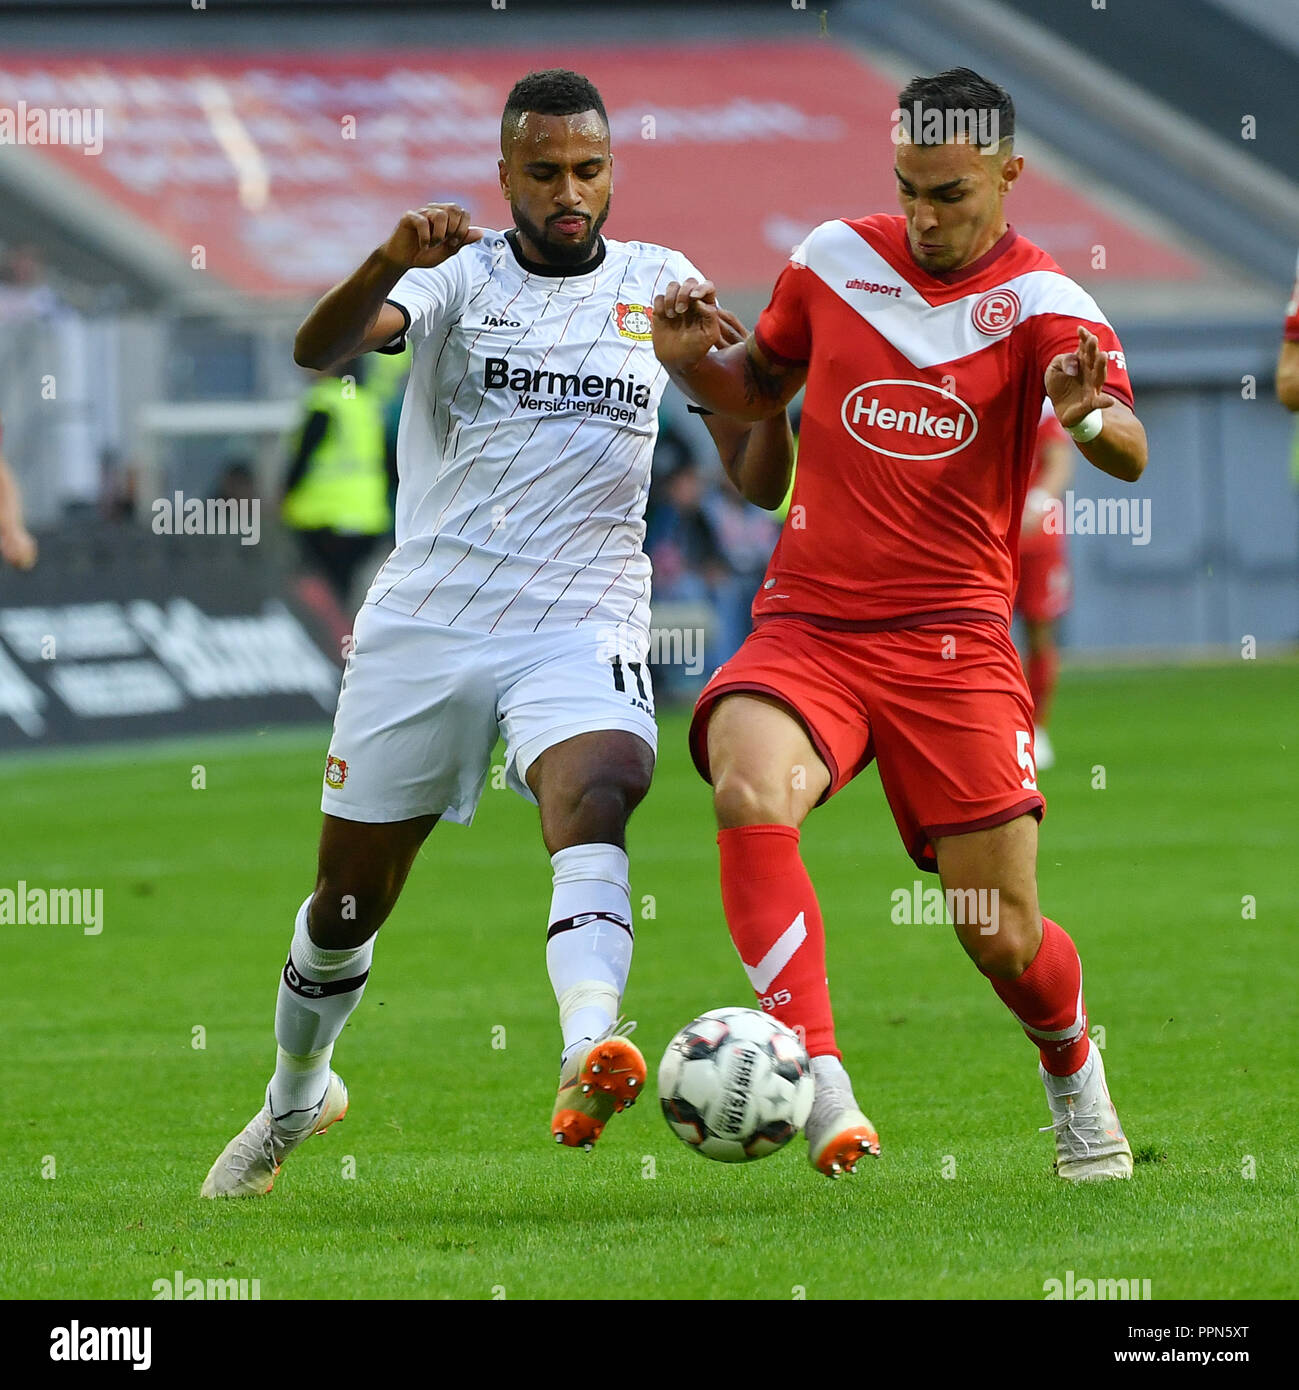 Dusseldorf. 26th Sep, 2018. Kaan Ayhan (R) of Fortuna Dusseldorf and Isaac  Kies Thelin of Bayer Leverkusen battle for the ball during the Bundesliga  match between Fortuna Duesseldorf and Bayer Leverkusen at